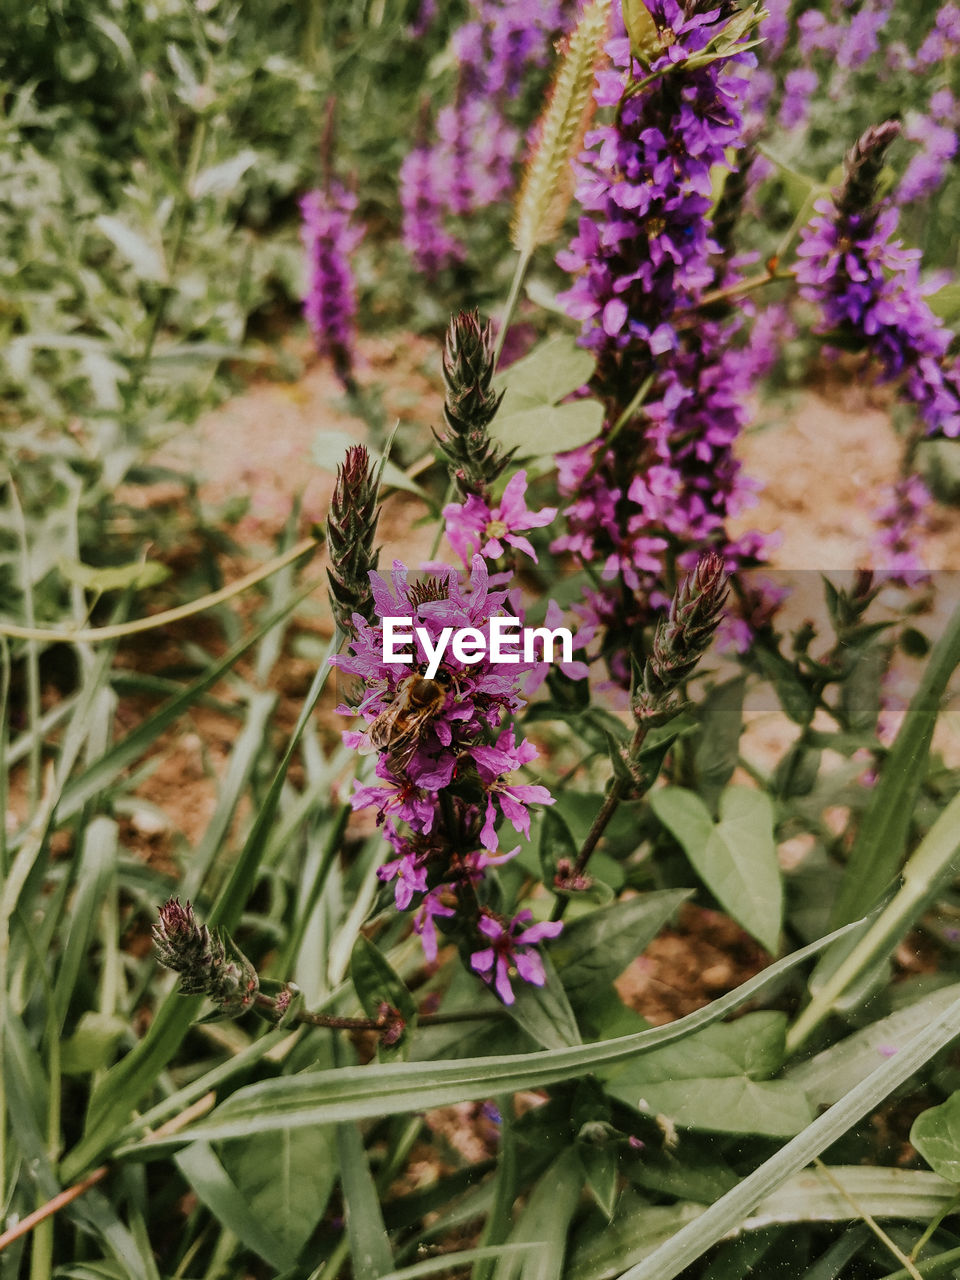 plant, flower, flowering plant, beauty in nature, growth, freshness, purple, fragility, nature, lavender, close-up, wildflower, no people, herb, petal, flower head, botany, day, insect, animal wildlife, animal themes, focus on foreground, plant part, animal, outdoors, blossom, inflorescence, leaf, land, green, field, meadow, pink